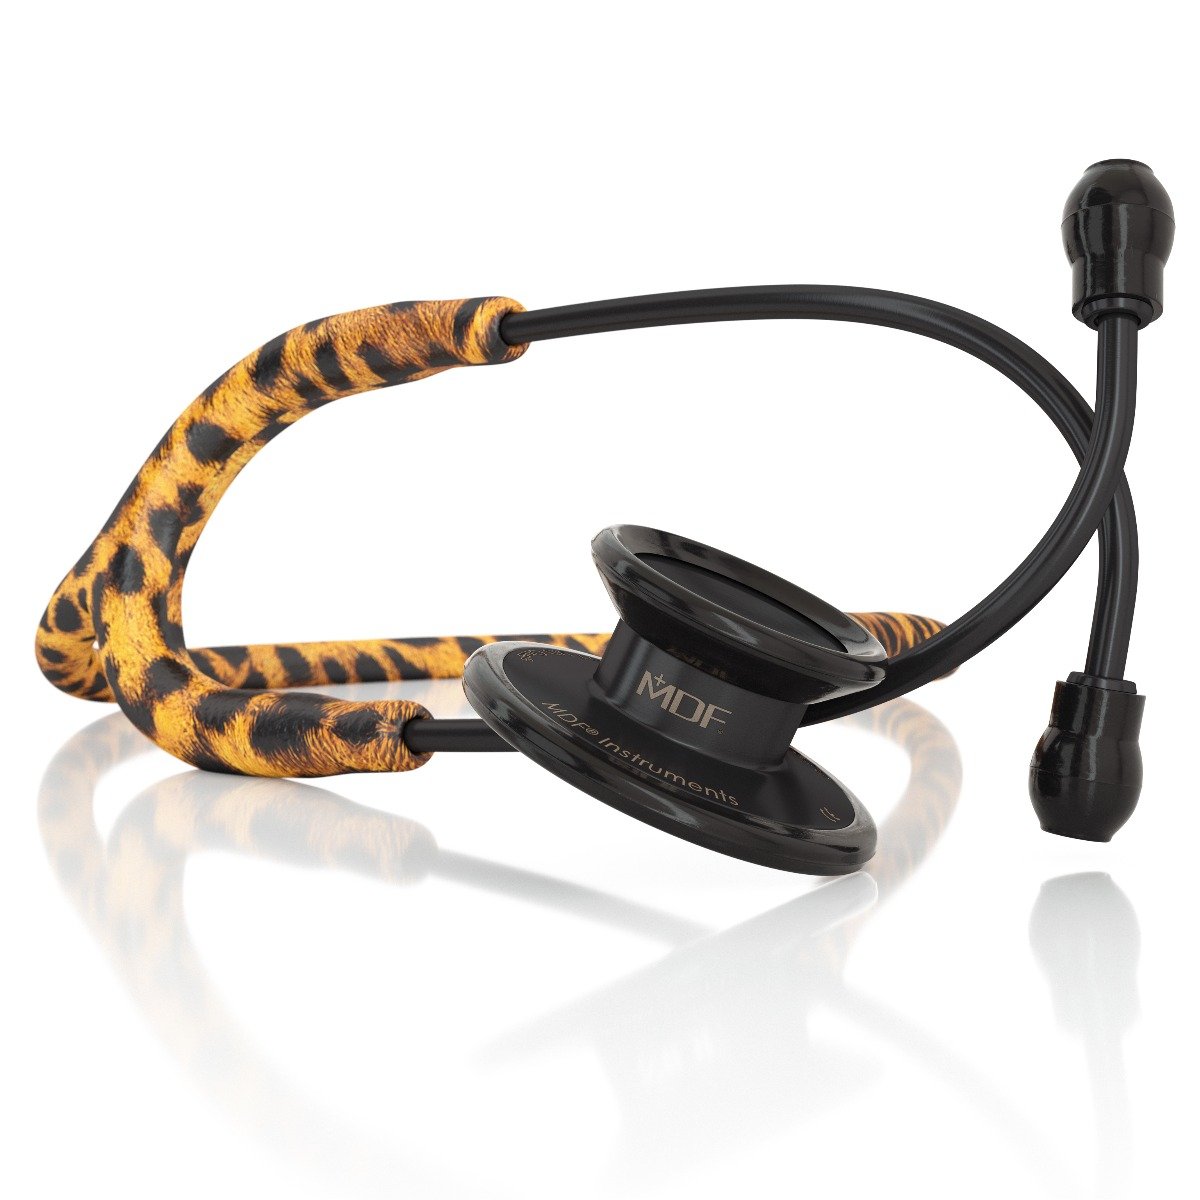 MDF® MD One® Stainless Steel Dual Head Stethoscope (MDF777) - BlackOut and Cheetah